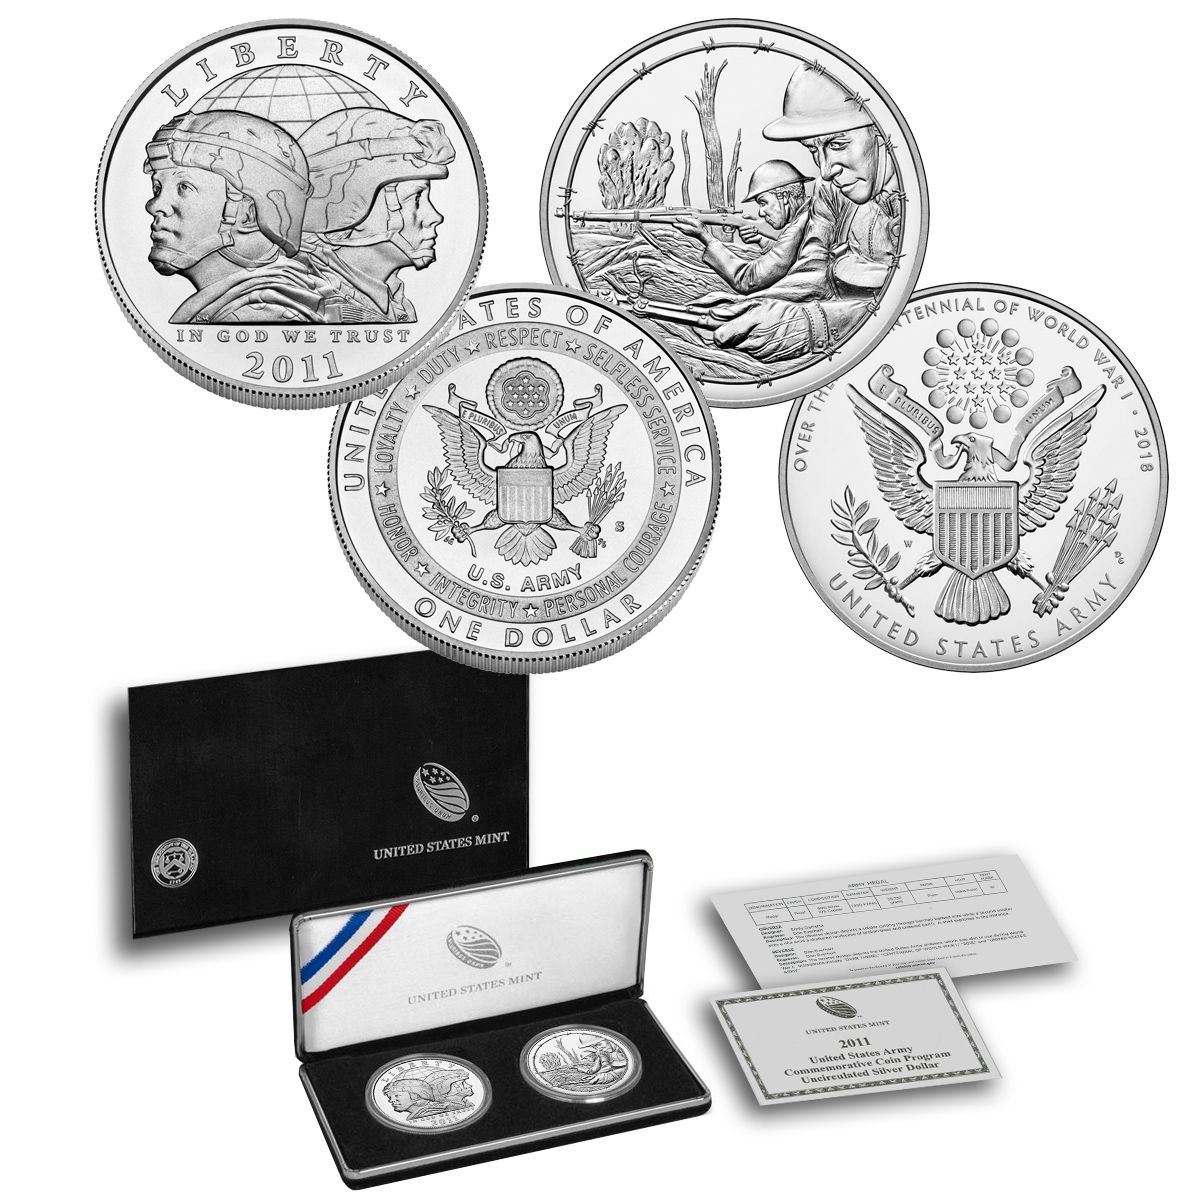 2011 USA MINT HOLOGRAM PRESIDENTIAL $1 DOLLAR 4 COIN SET Gift Box Certified 